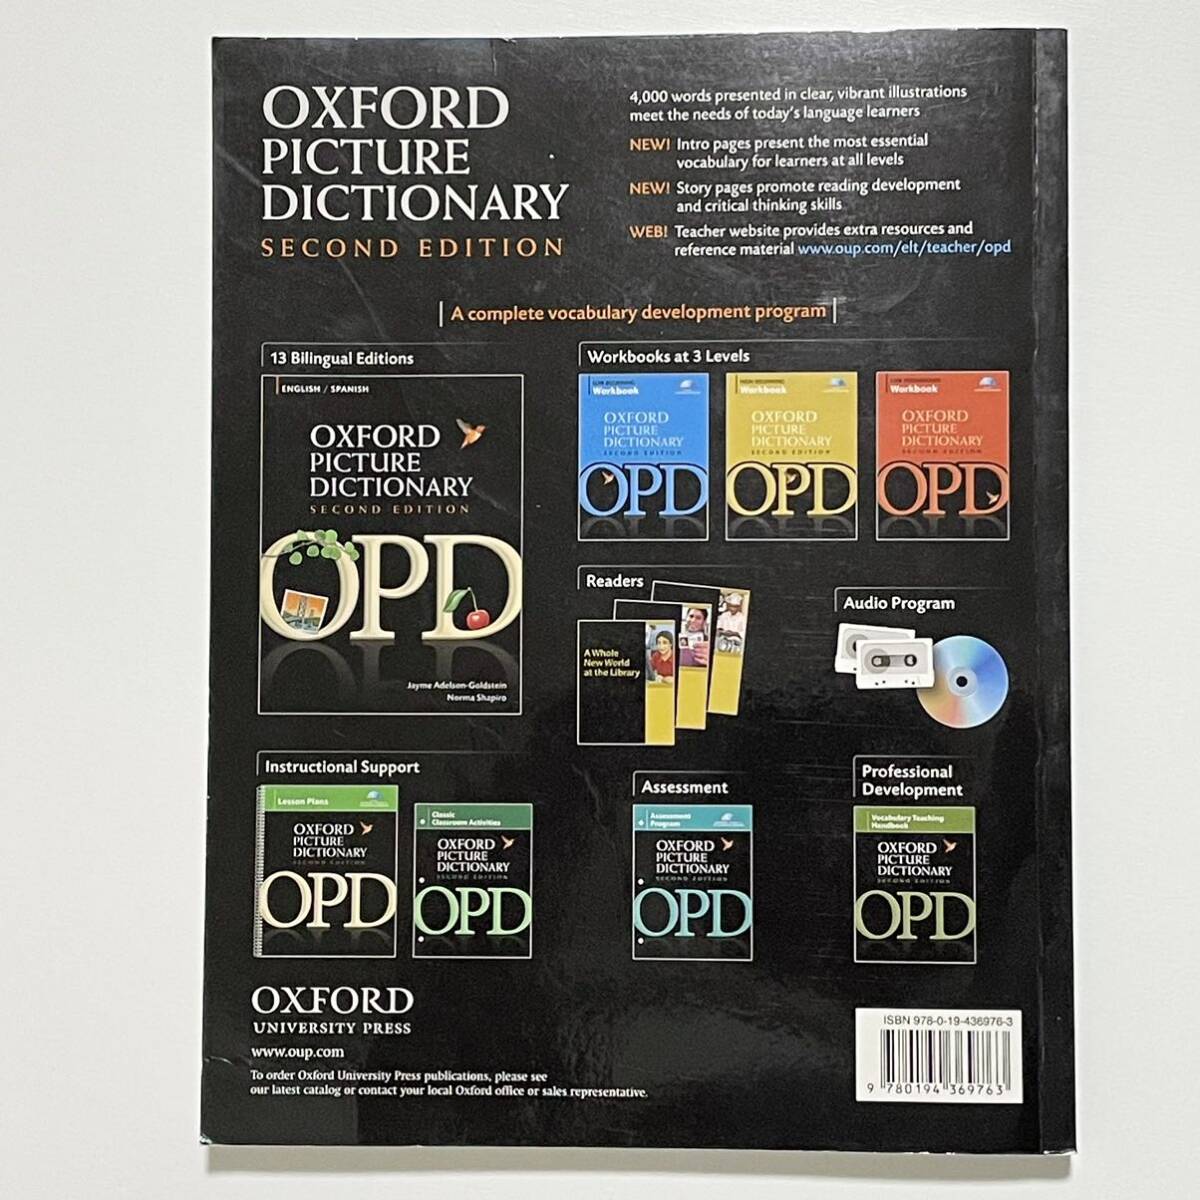 Oxford Picture Dictionary Second Edition Monolingual (オックスフォード ピクチャー ディクショナリー 第2版/OPD)の画像2